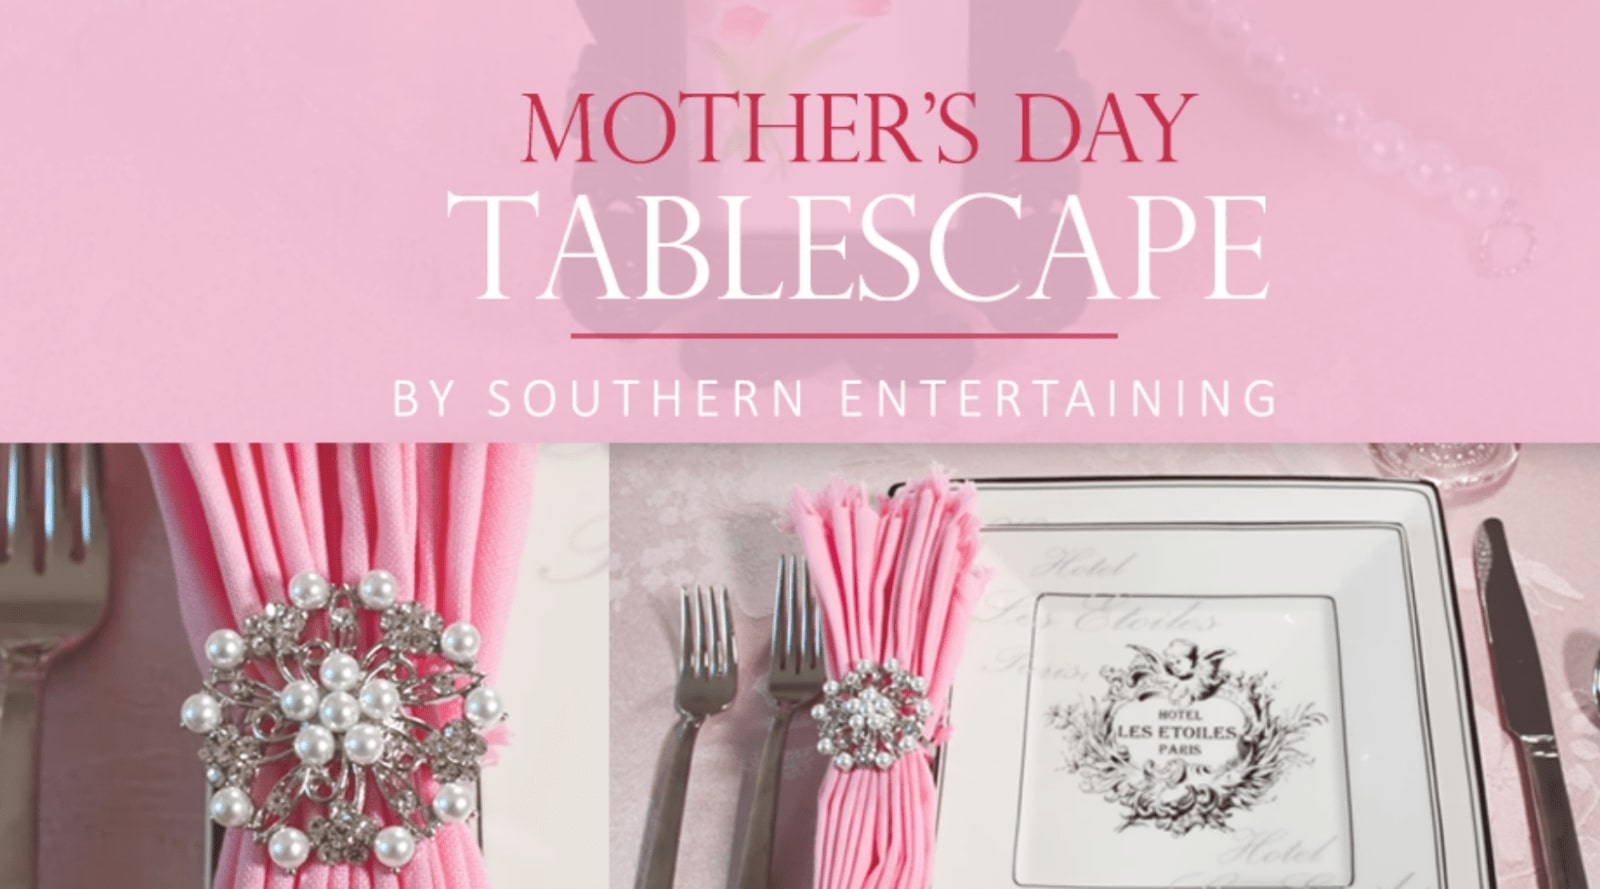 Mother’s Day Tablescape by Southern Entertaining